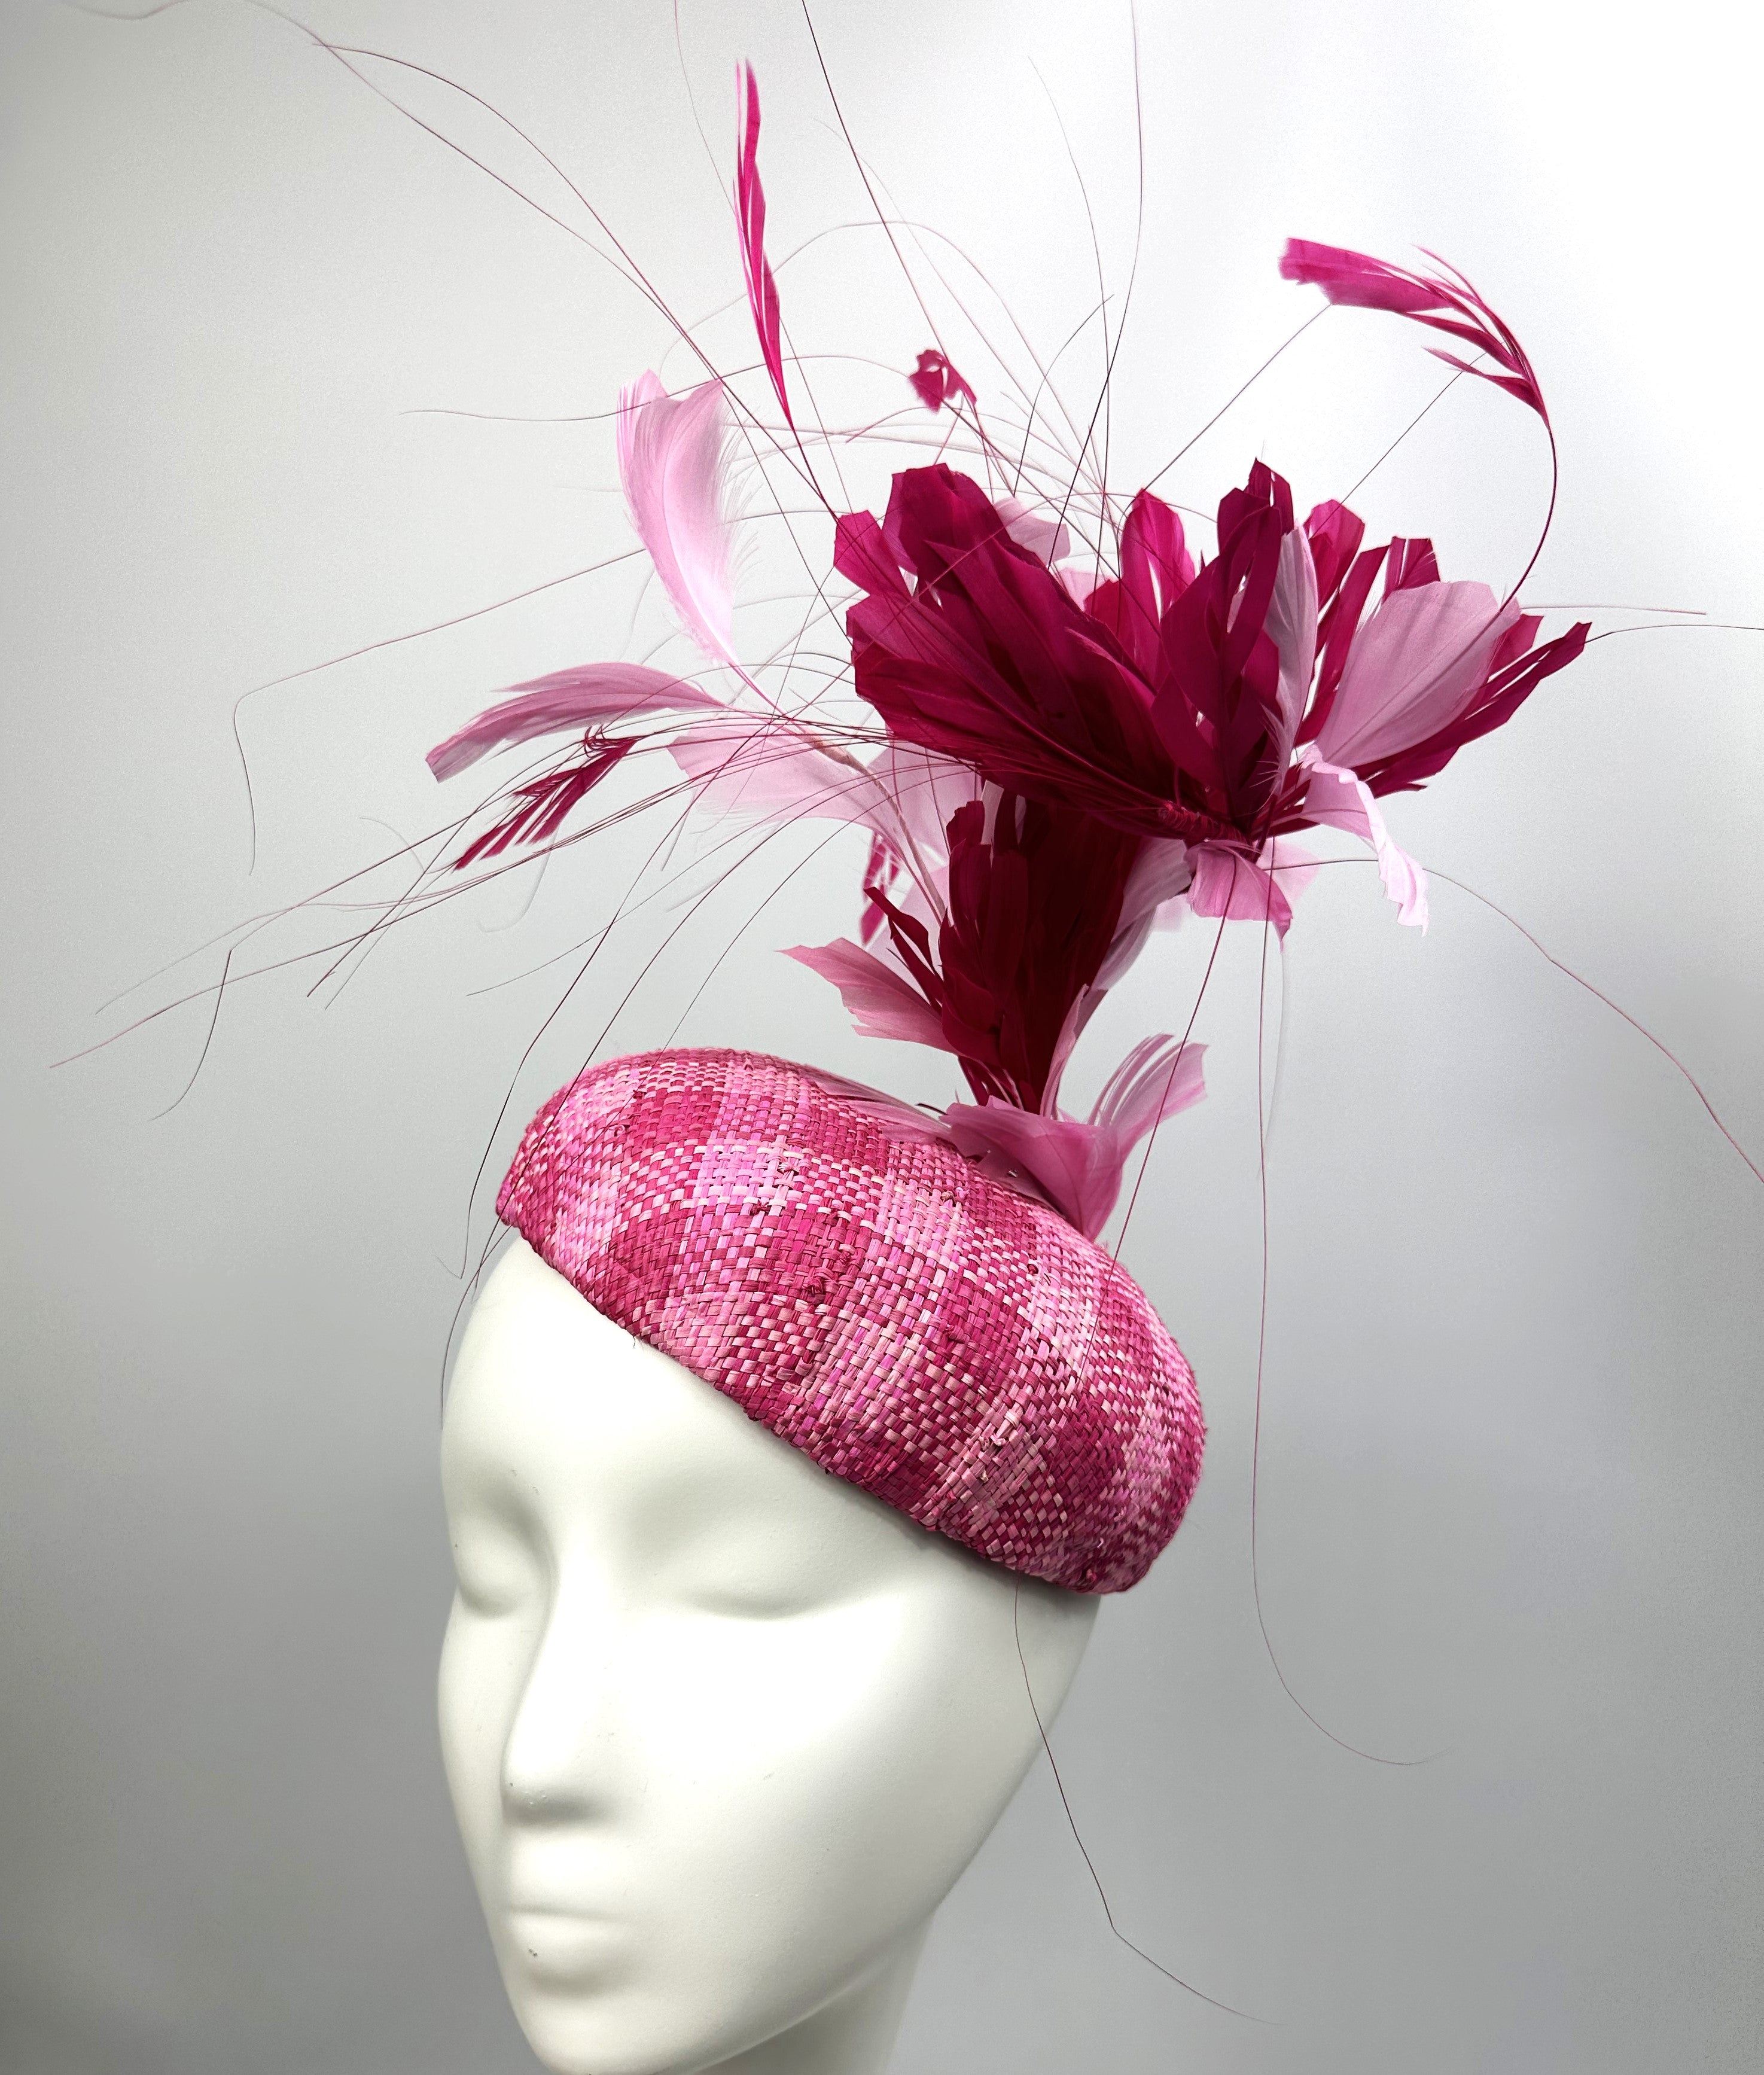 DOMENICA Pink Checked Straw Beret Hat Pink Feathers Race Hat